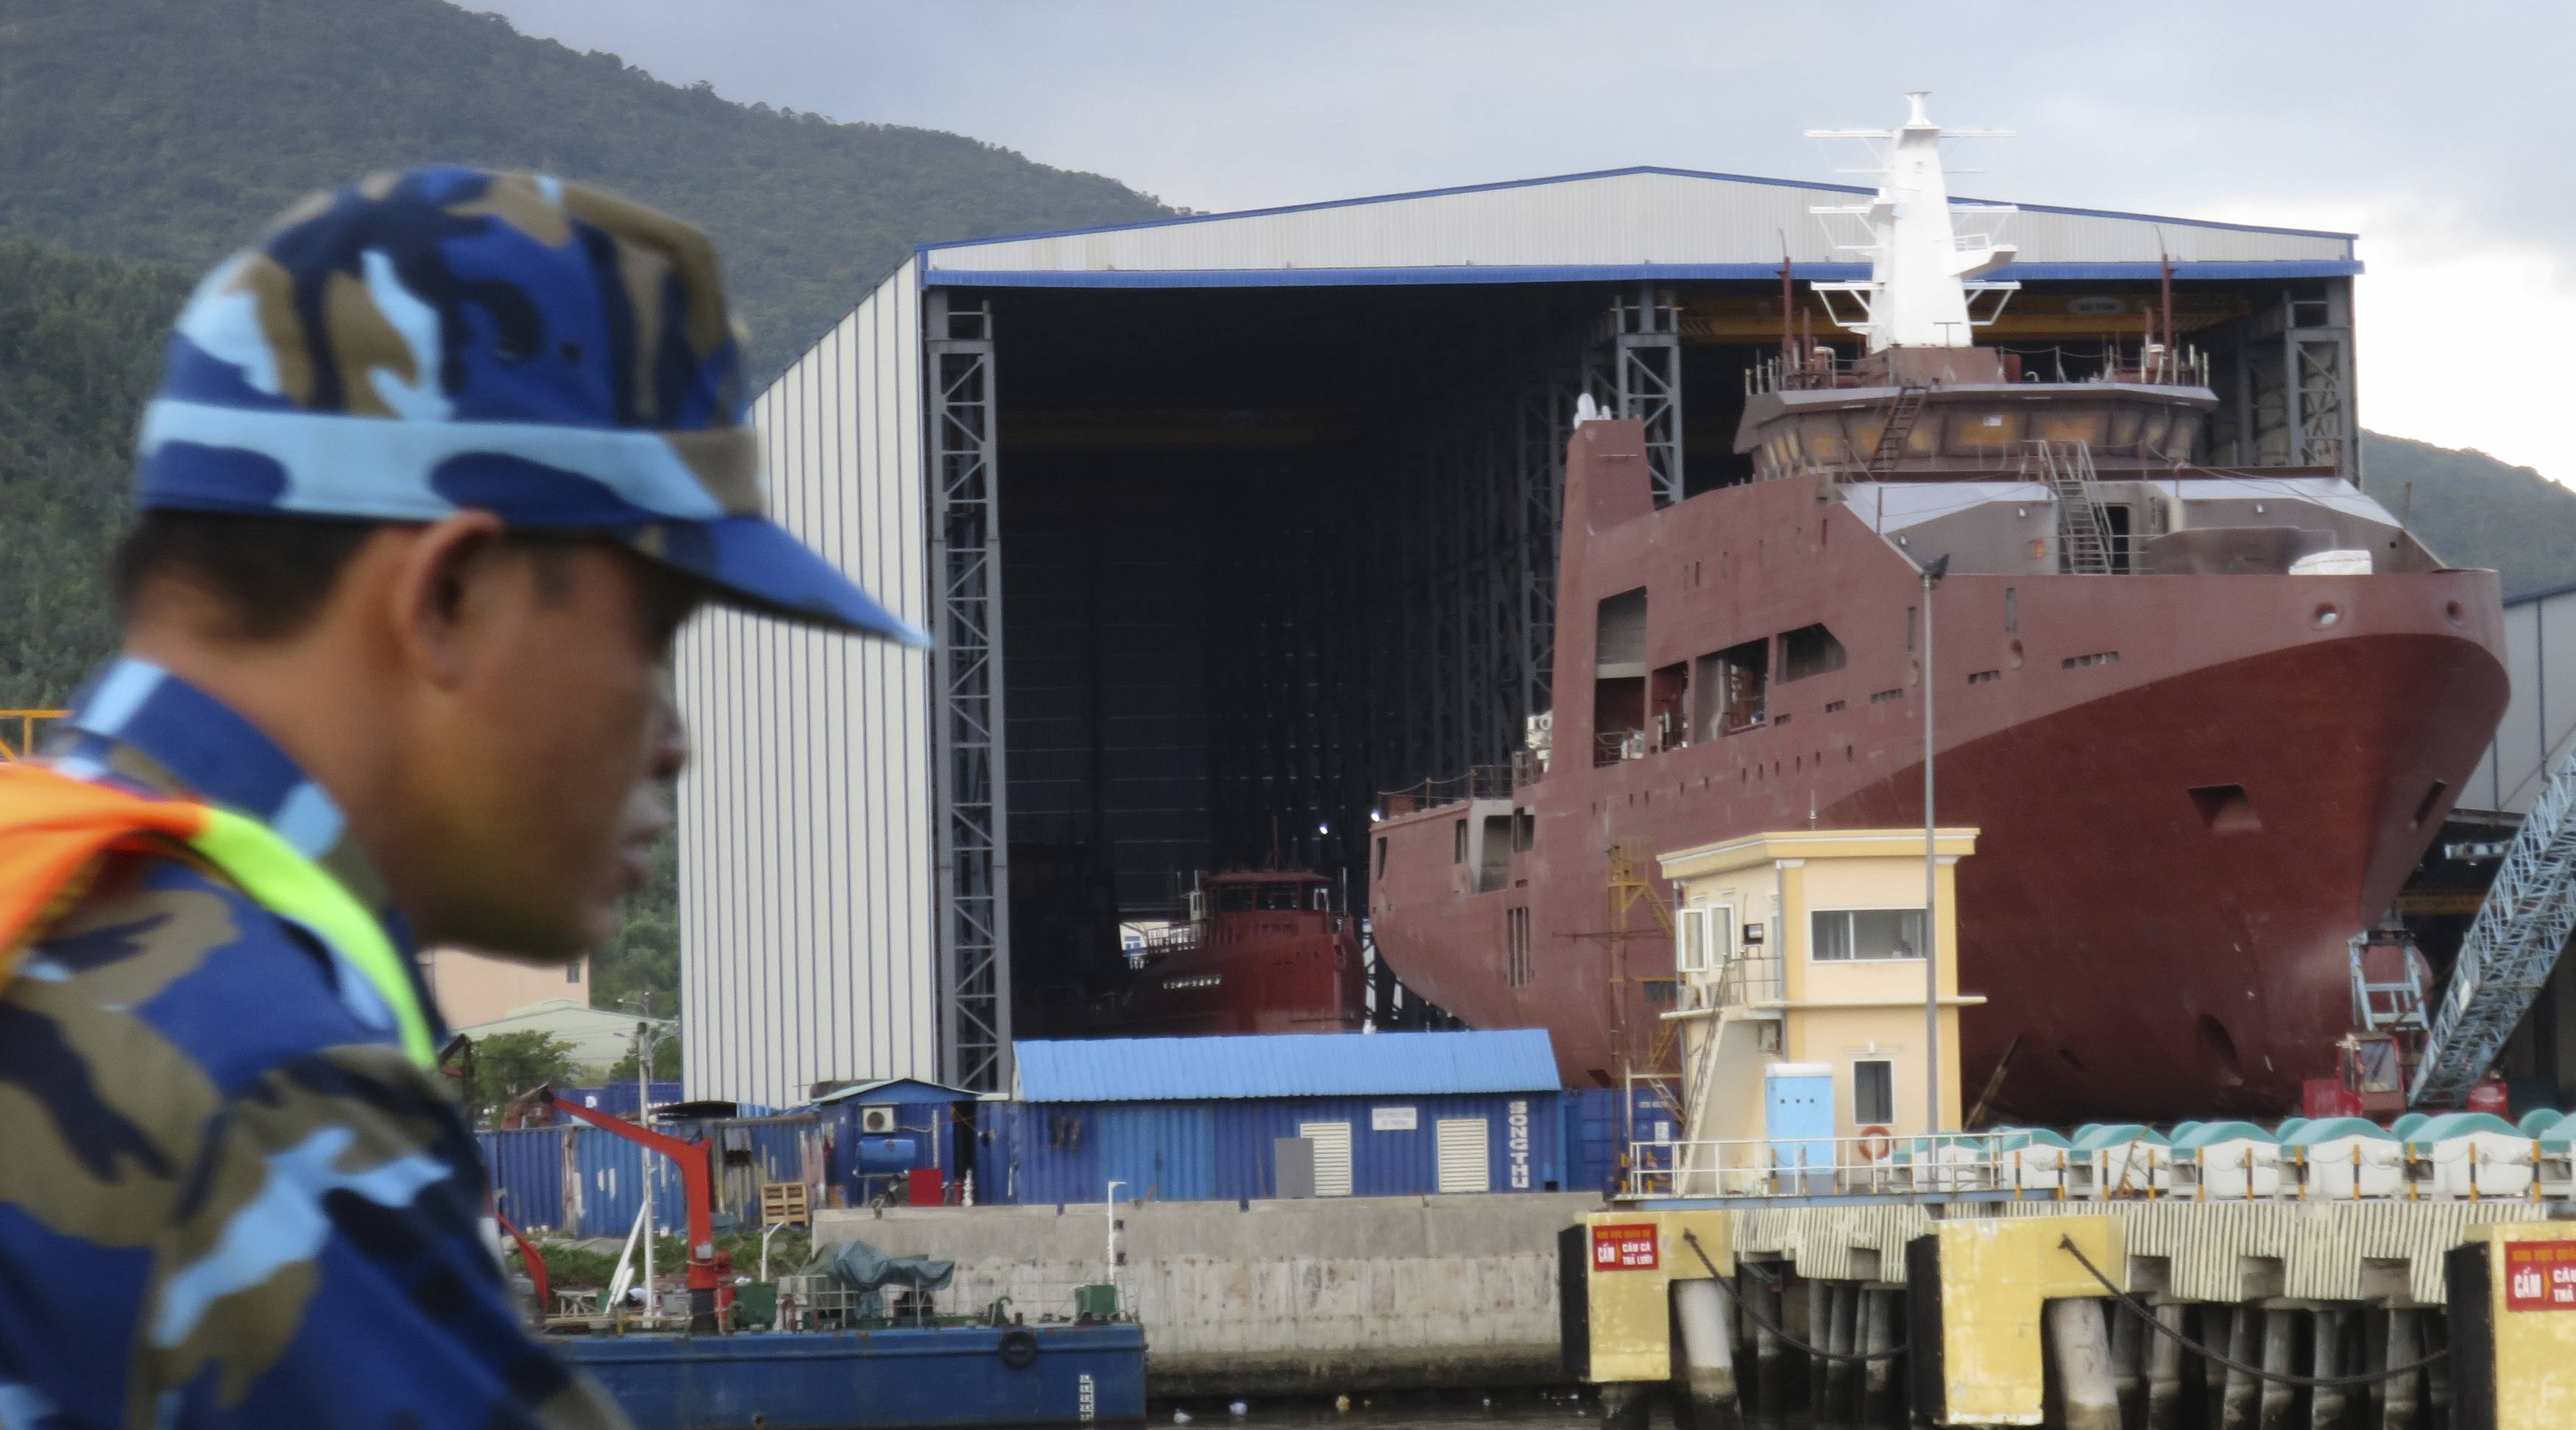 A Vietnam Coast Guard crewman looks out near a patrol ship being built at a shipyard in Danang in July 2014. Japan has signed a ¥36.6 billion deal with Vietnam to provide the Southeast Asian country with six patrol boats to boost its maritime law enforcement capabilities. | REUTERS